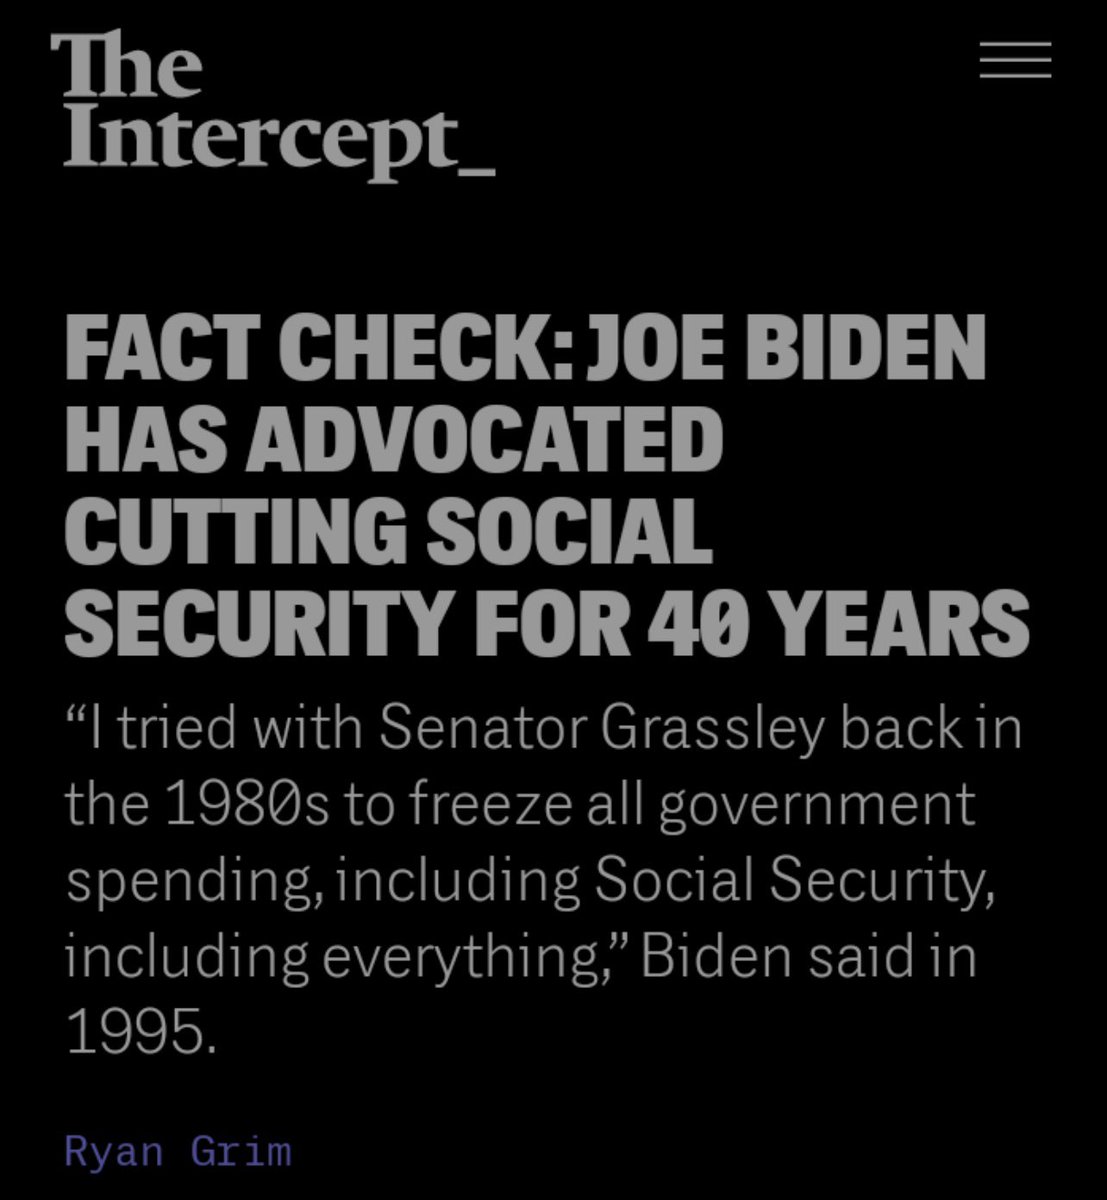 @JoeBiden BREAKING NEWS: @realDonaldTrump DID NOT say he was cutting Social Security and Medicare. He said he was going to cut WASTE AND FRAUD from the programs. You know, the things that keep Democrat voters. Do not believe all the Democrat talking heads who are turning his words…